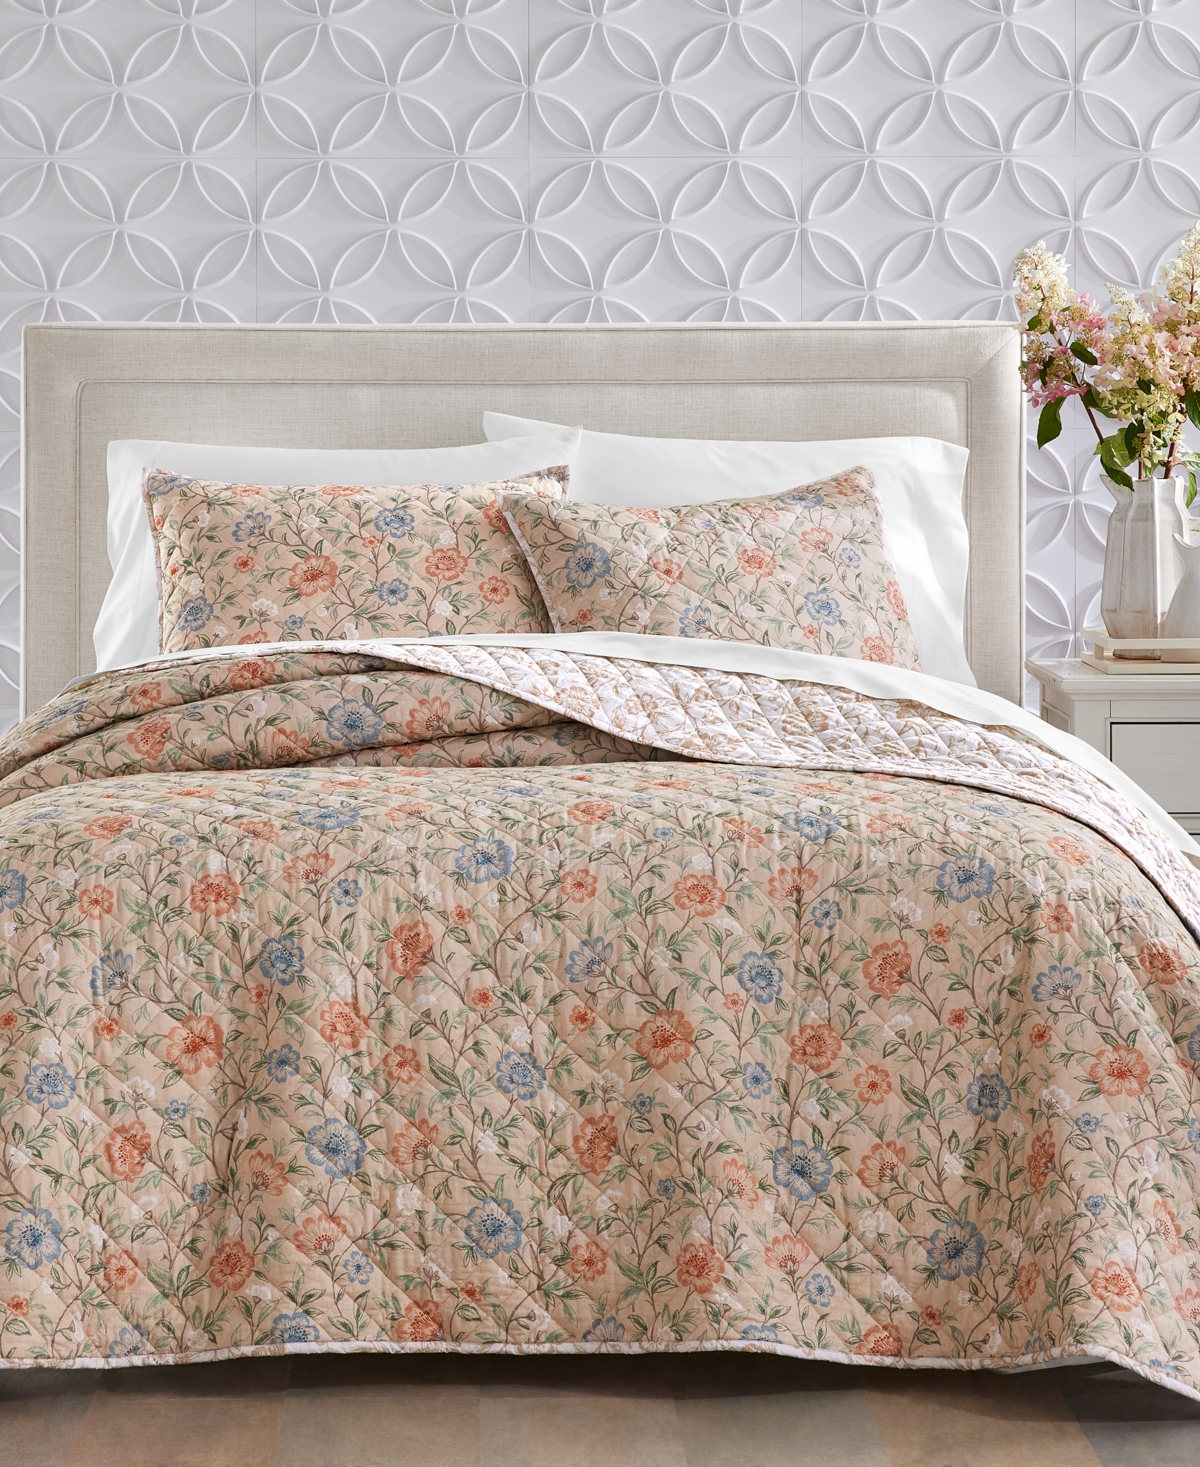 Charter Club Garden Floral Quilt, Full/queen, Created For Macy's In Tan